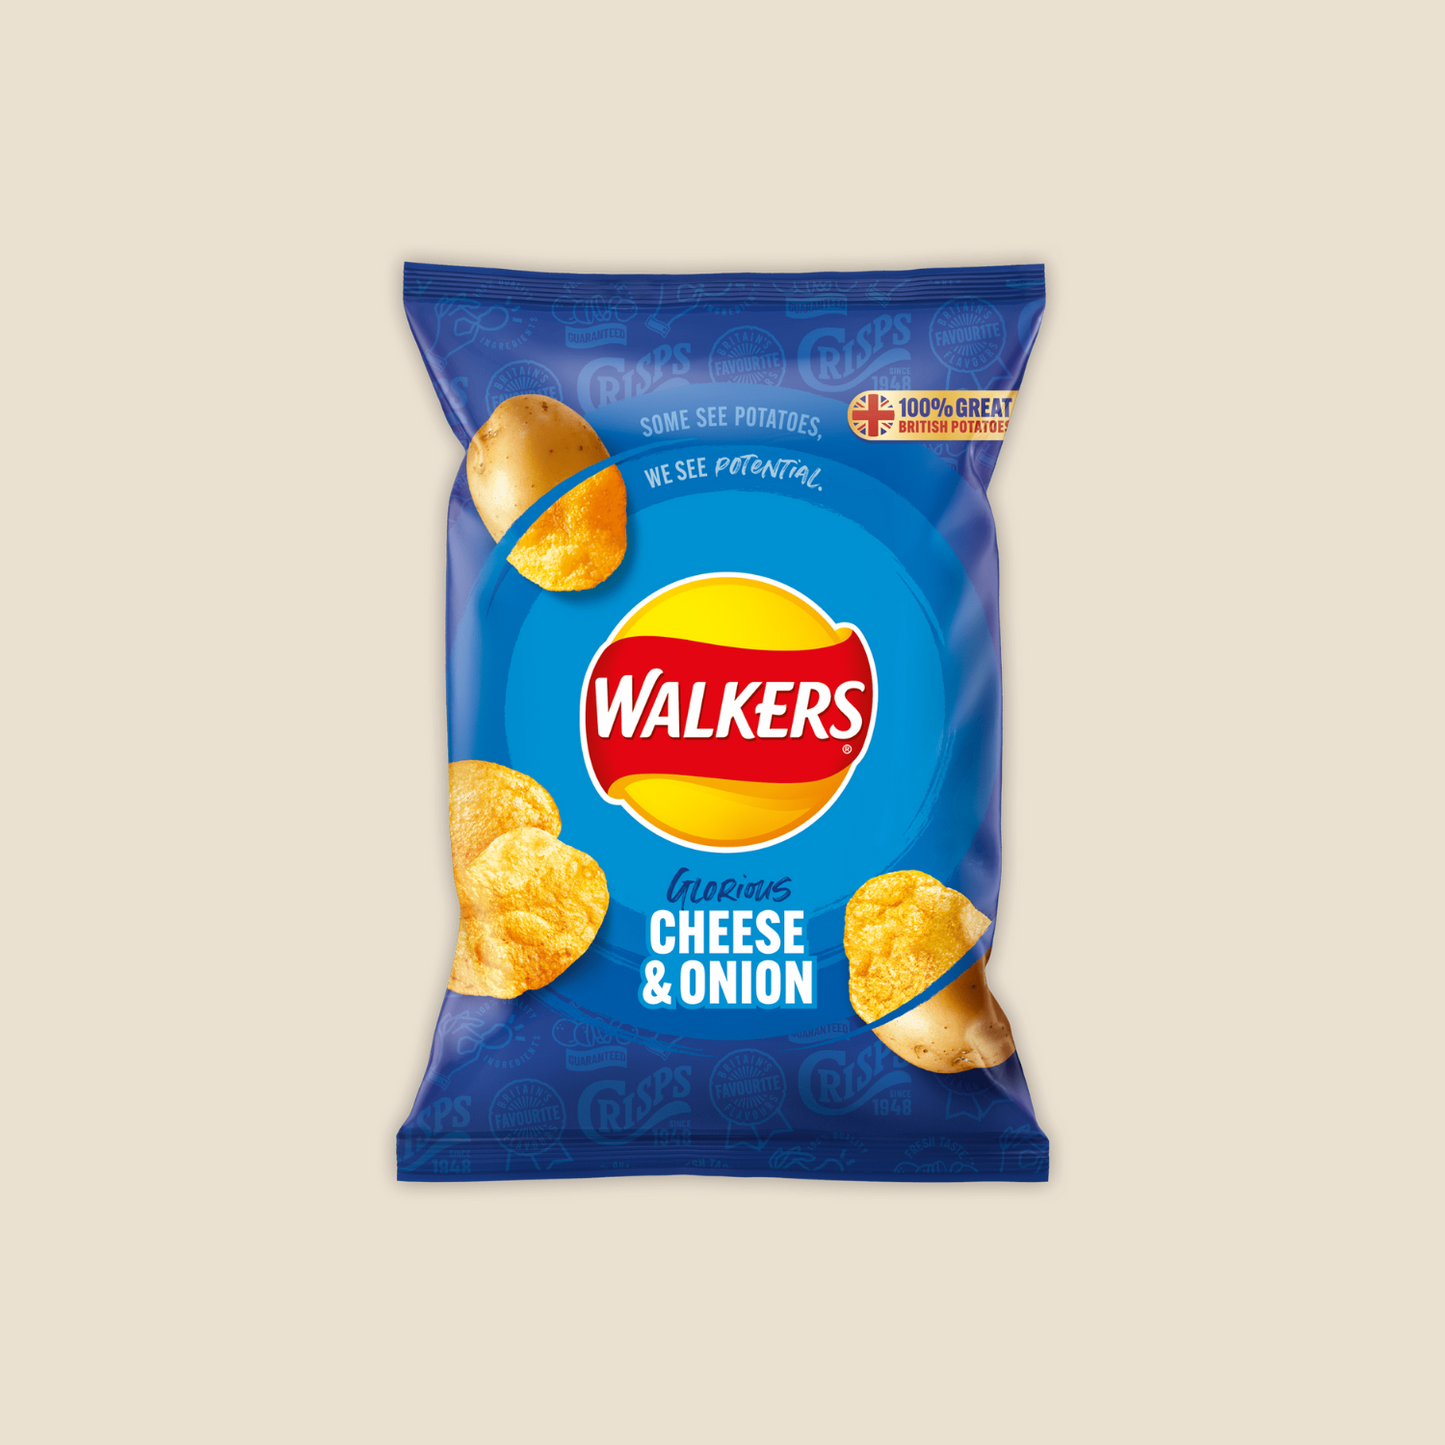 Walkers Glorious Cheese & Onion 32.5g